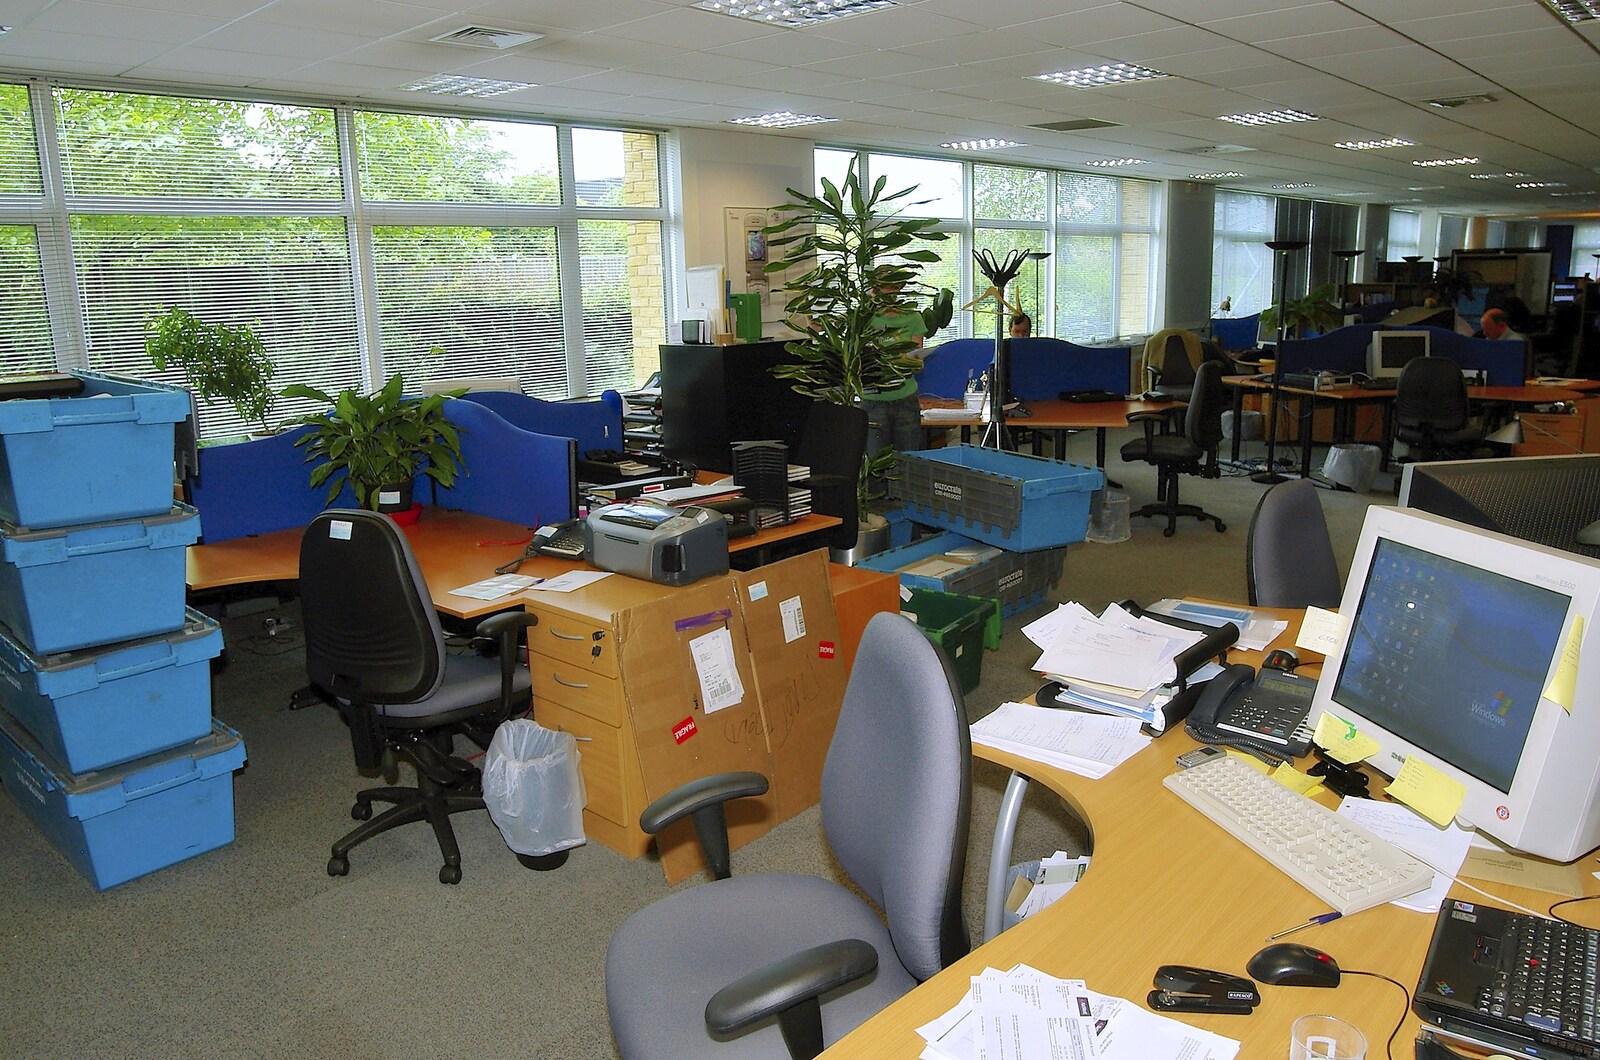 Nosher's old desk from Qualcomm Moves Offices, Milton Road, Cambridge - 26th July 2006